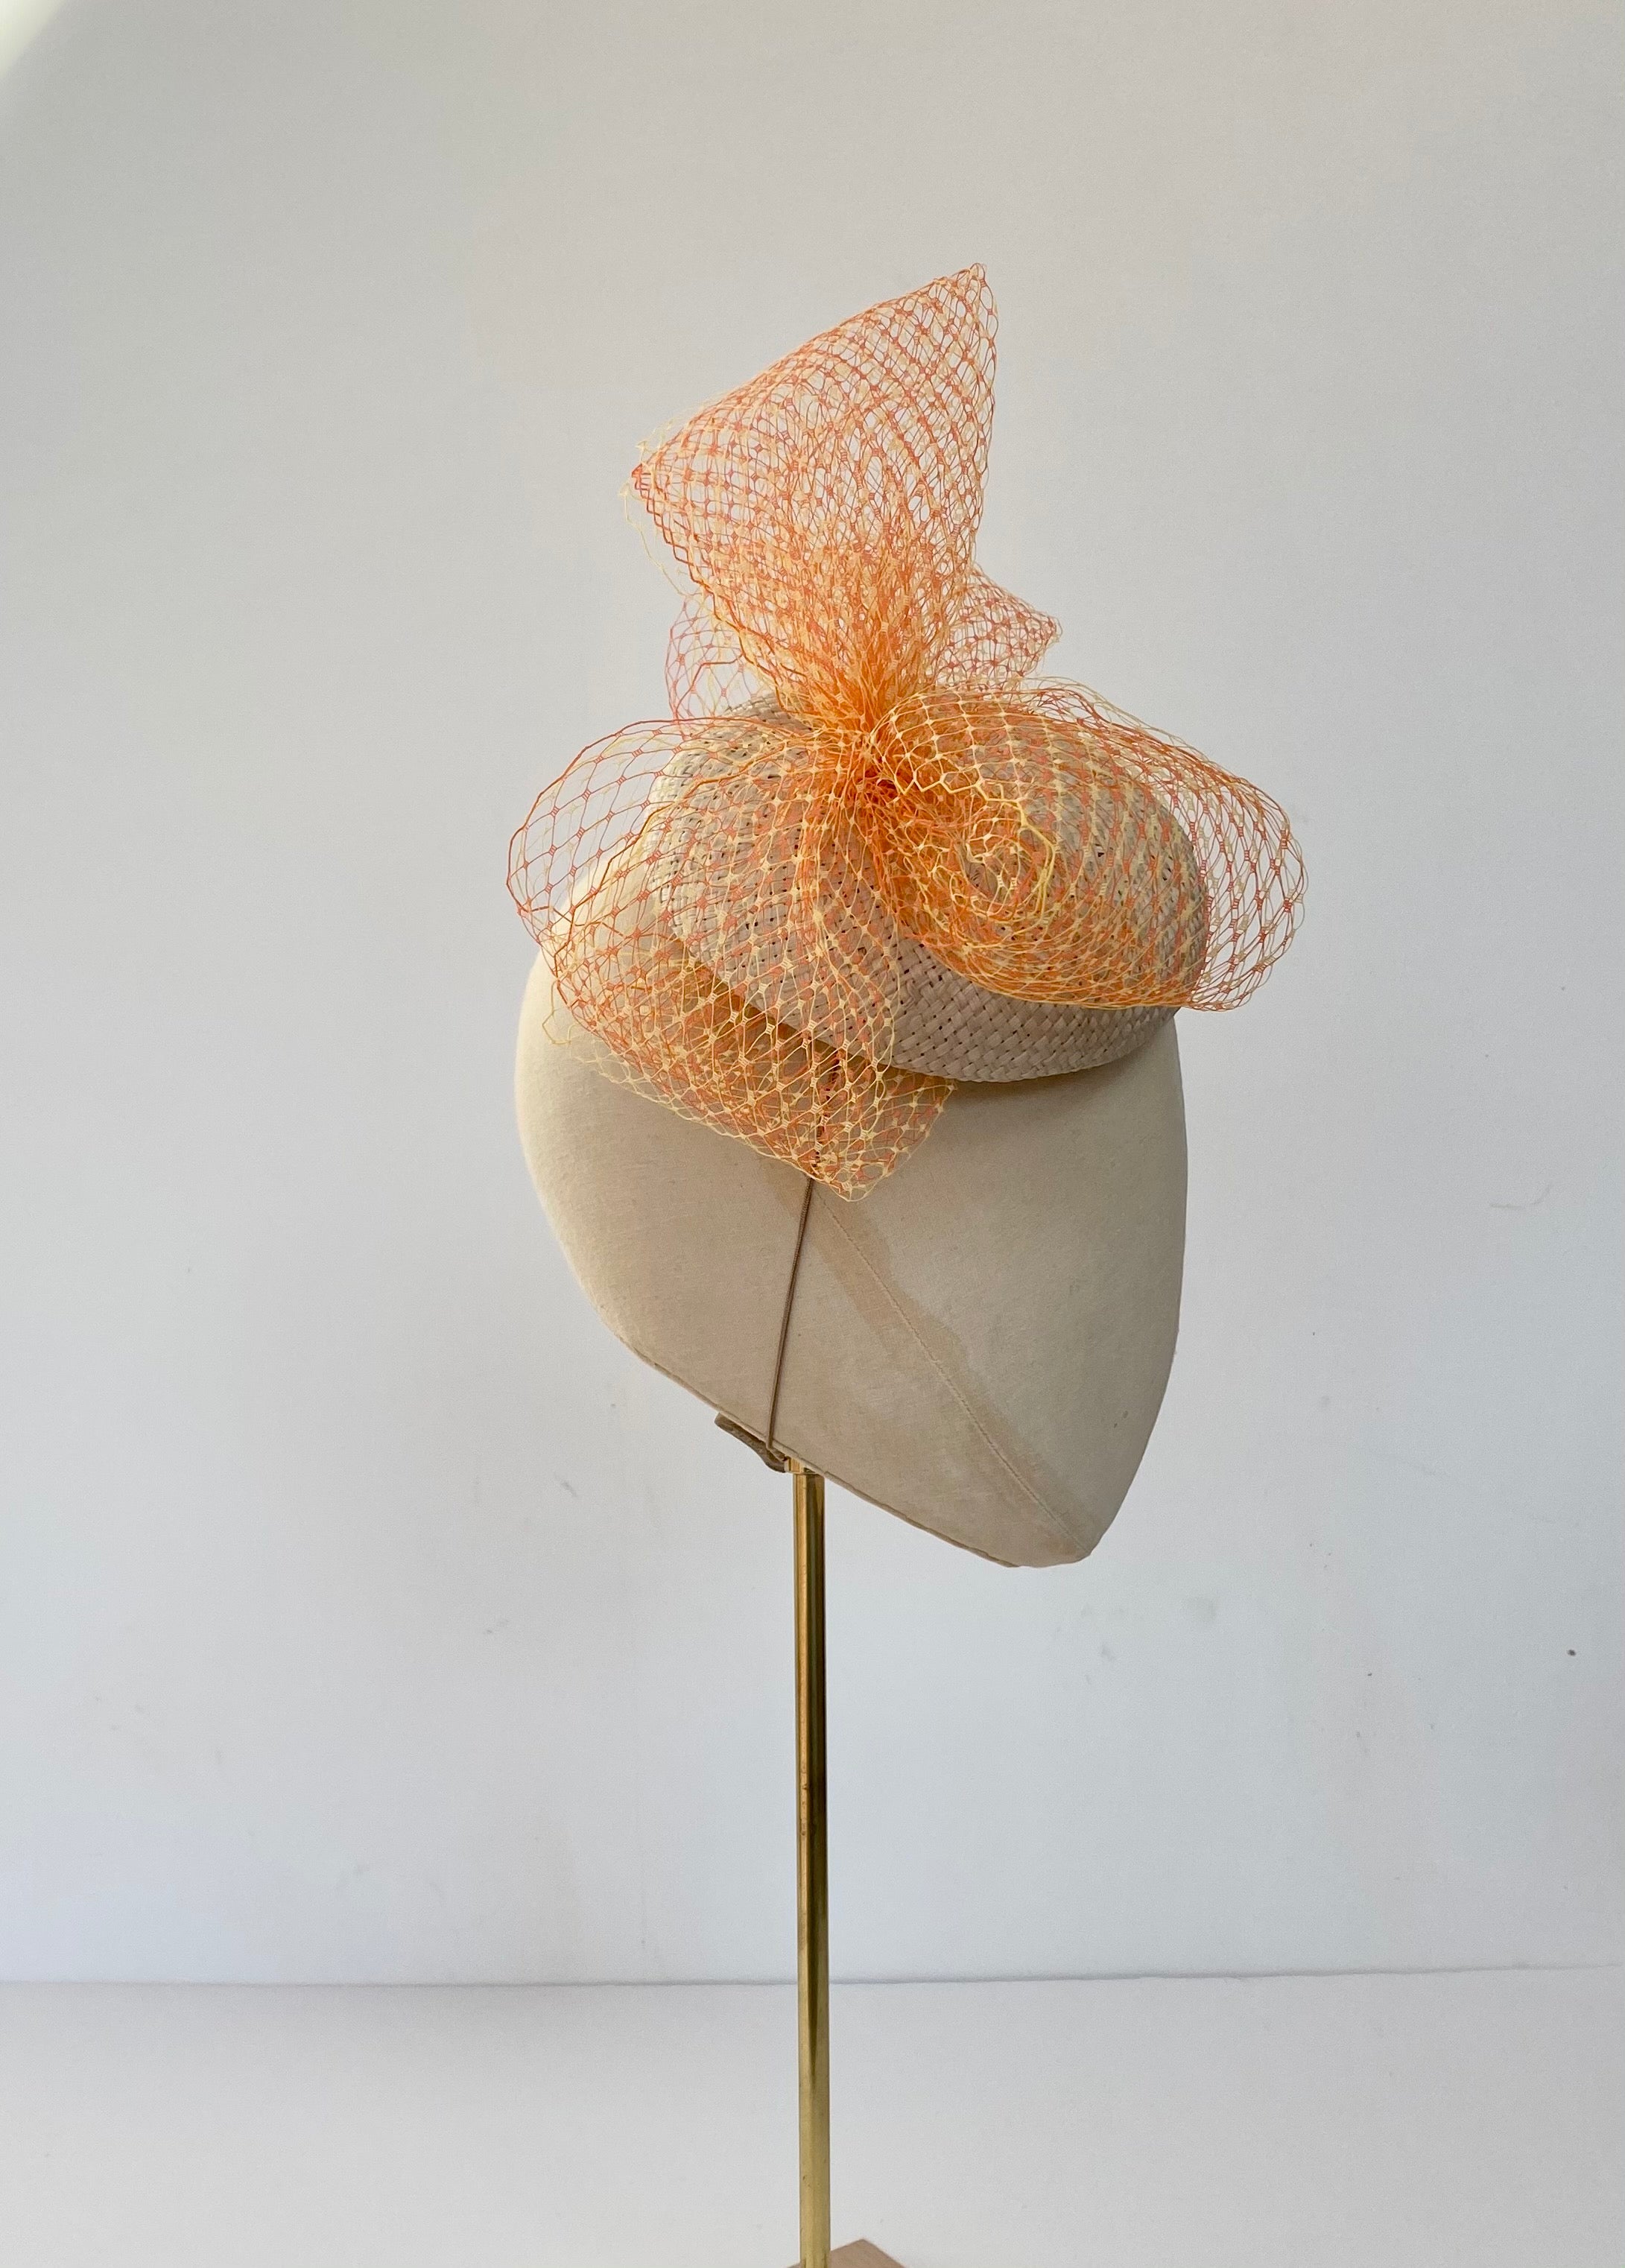 natural ivory button cocktail hat for wedding guest mother of the bride, with bright coloured veiling bow in orange and yellow